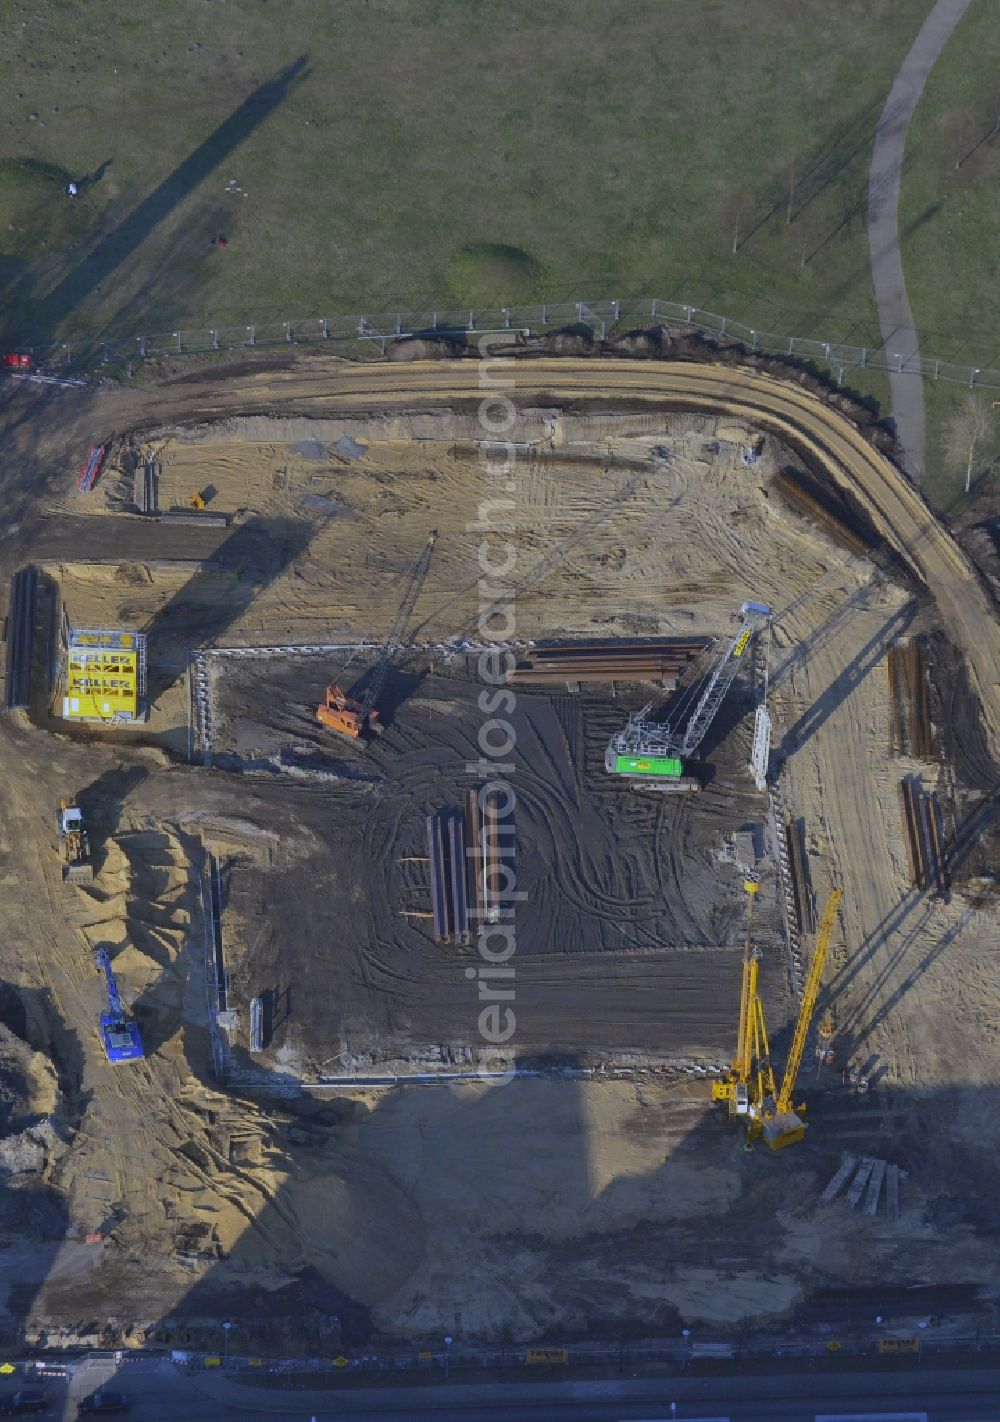 Aerial image Potsdam - View of the new construction project of the investment bank of the state Brandenburg in Potsdam